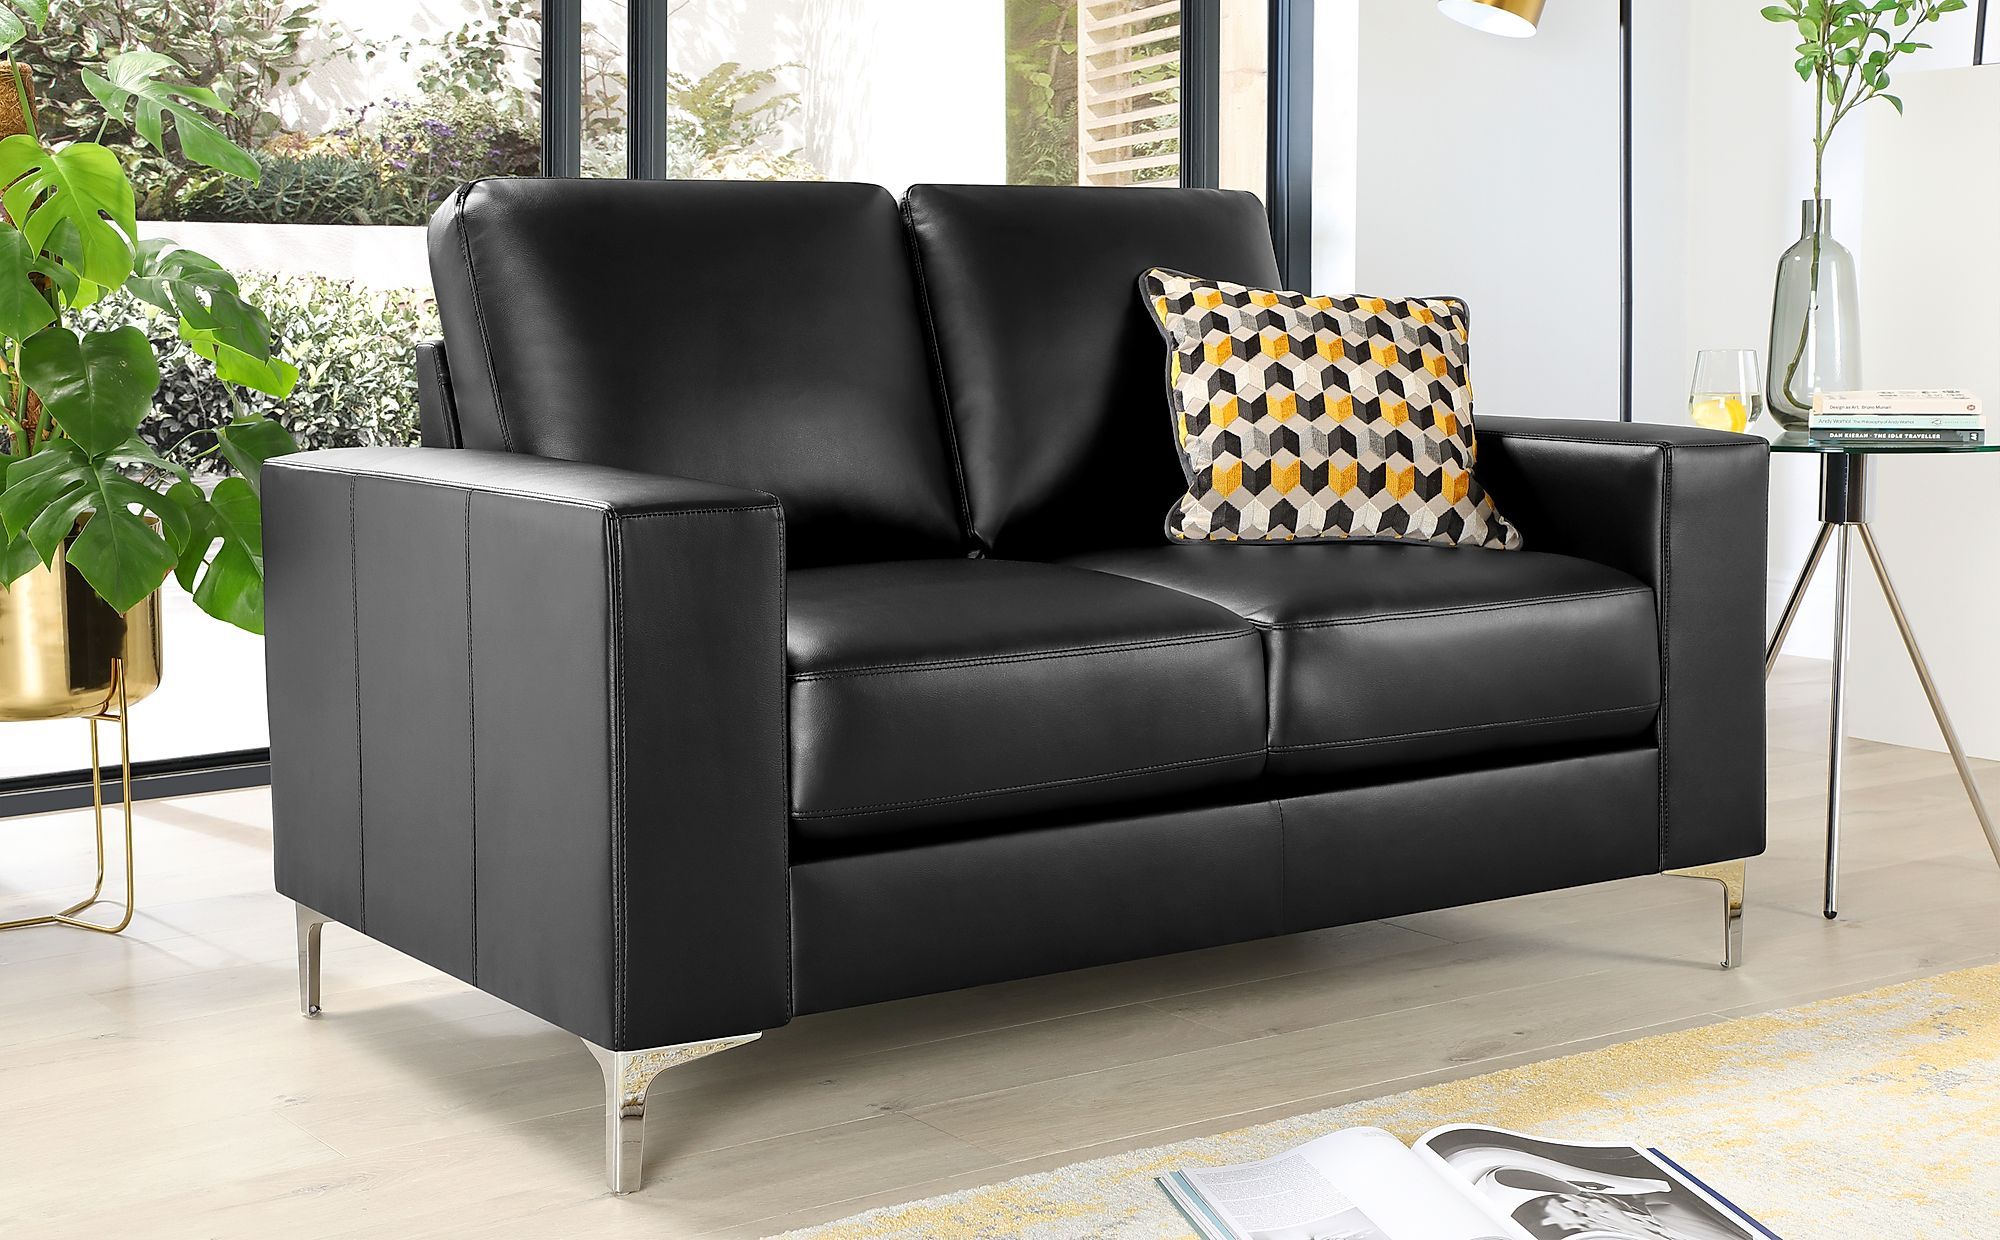 Baltimore Black Leather 2 Seater Sofa | Furniture Choice Within Black Velvet 2 Seater Sofa Beds (View 9 of 20)